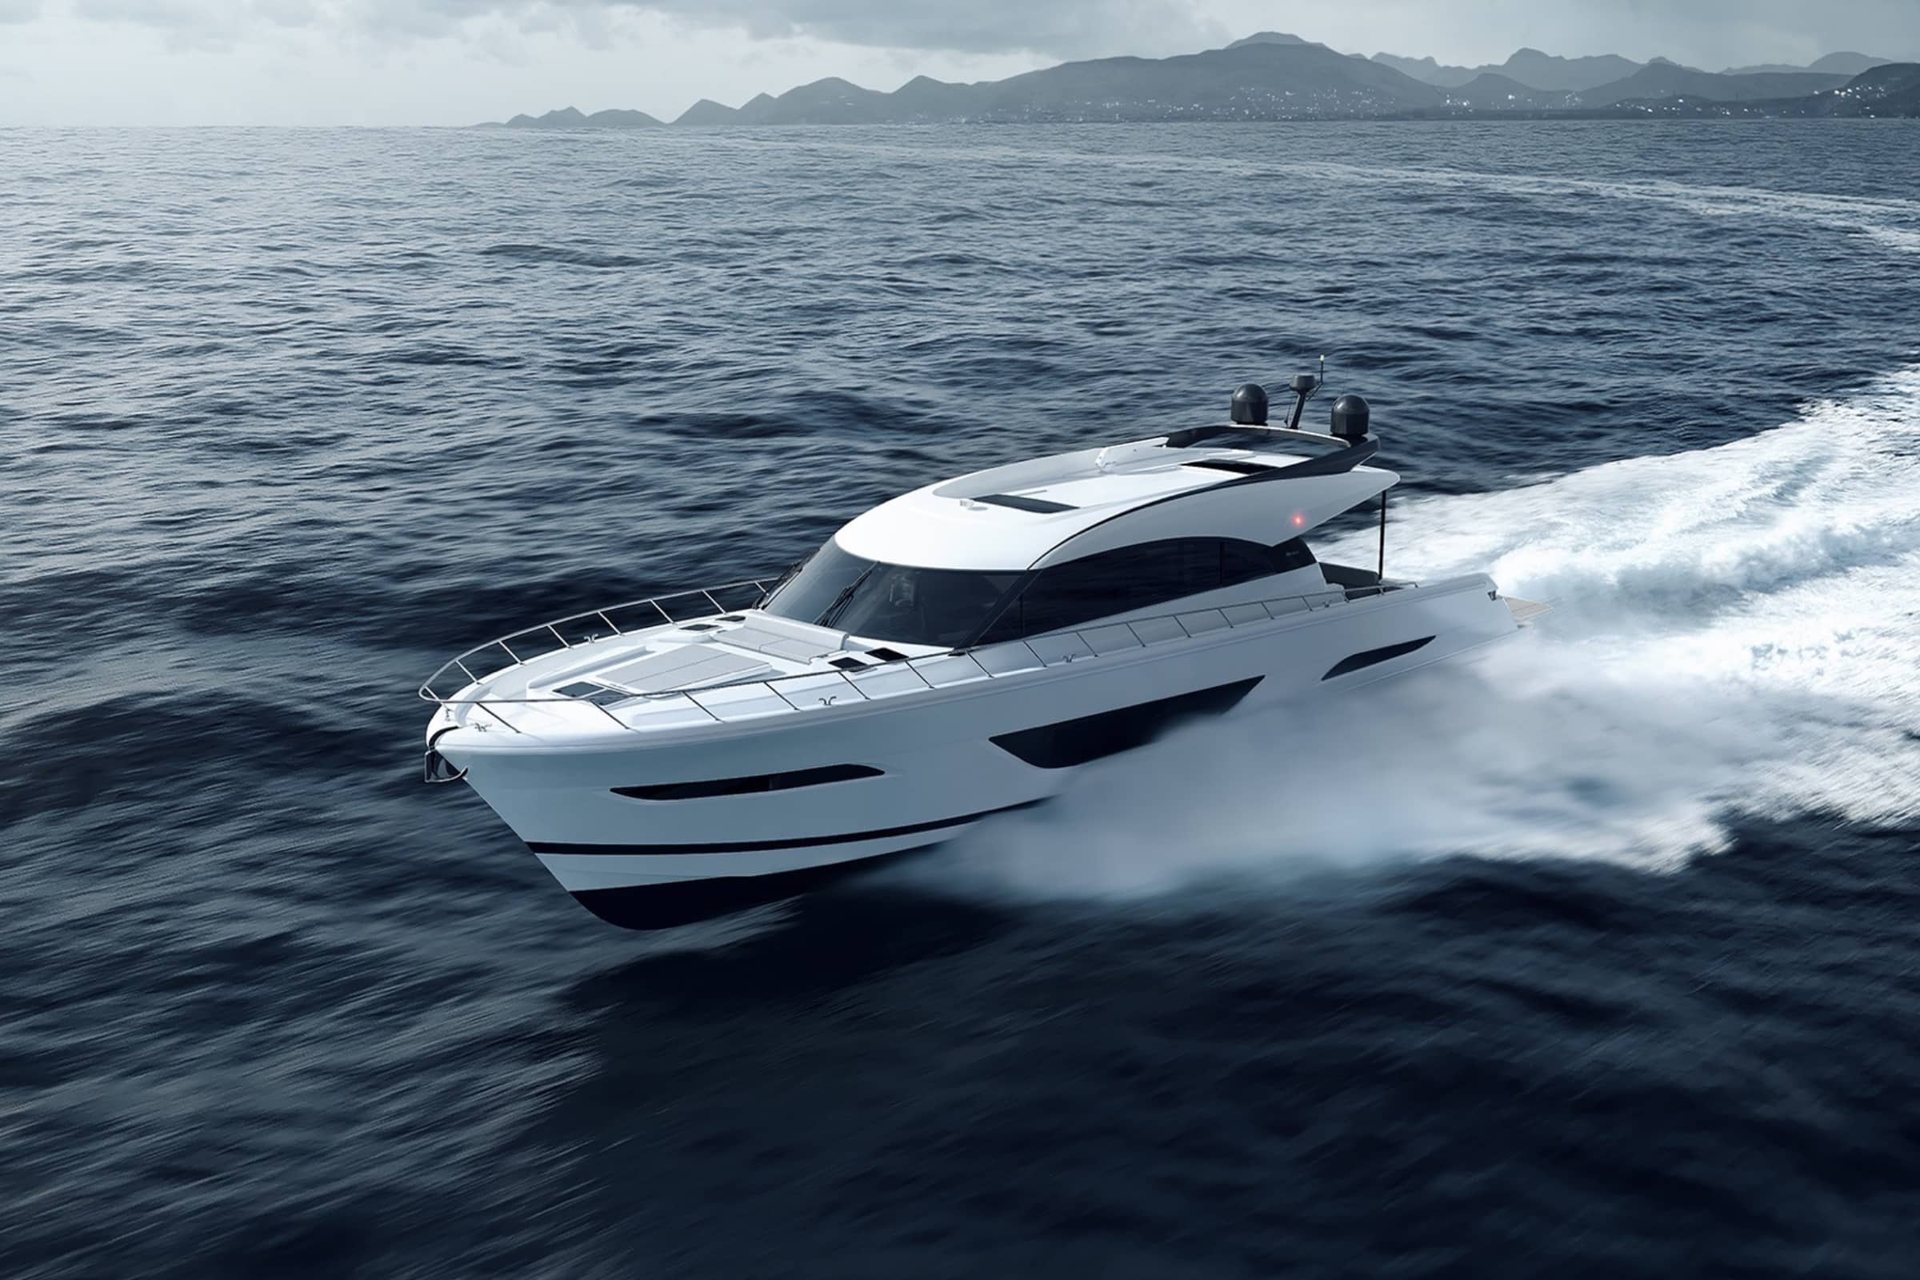 360 VR Virtual Tours of the Maritimo S75